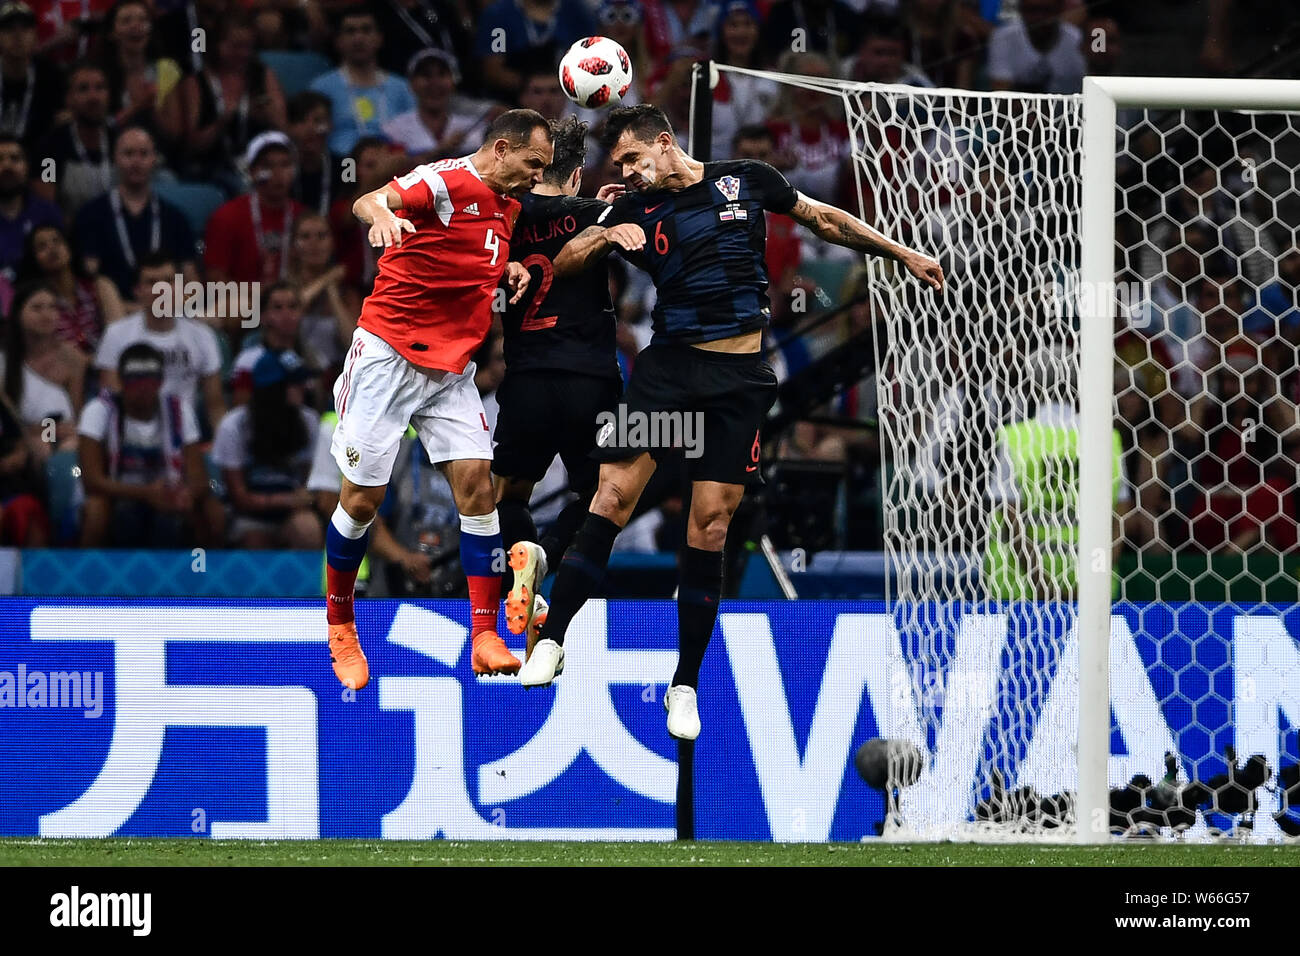 Sergei Ignashevich of Russia, left, heads the ball against Sime Vrsaljko and Dejan Lovren of Croatia with an advertising board for Chinese conglomerat Stock Photo